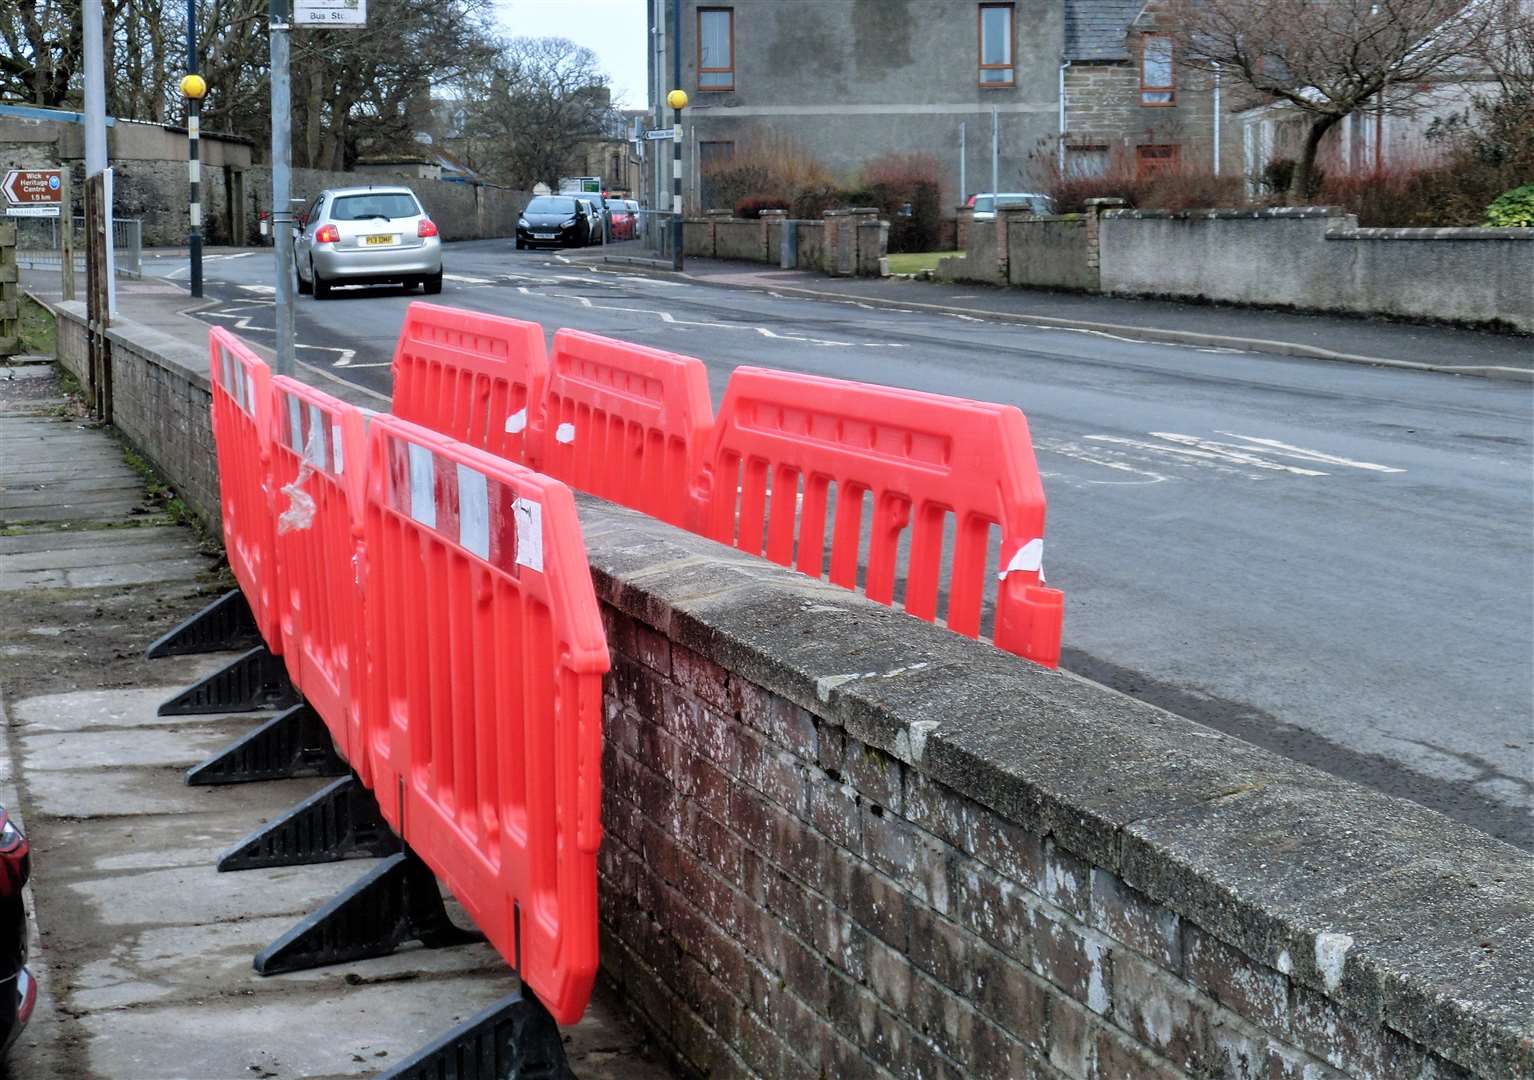 A recent picture showing repairs have been done to the wall since last month's incident.